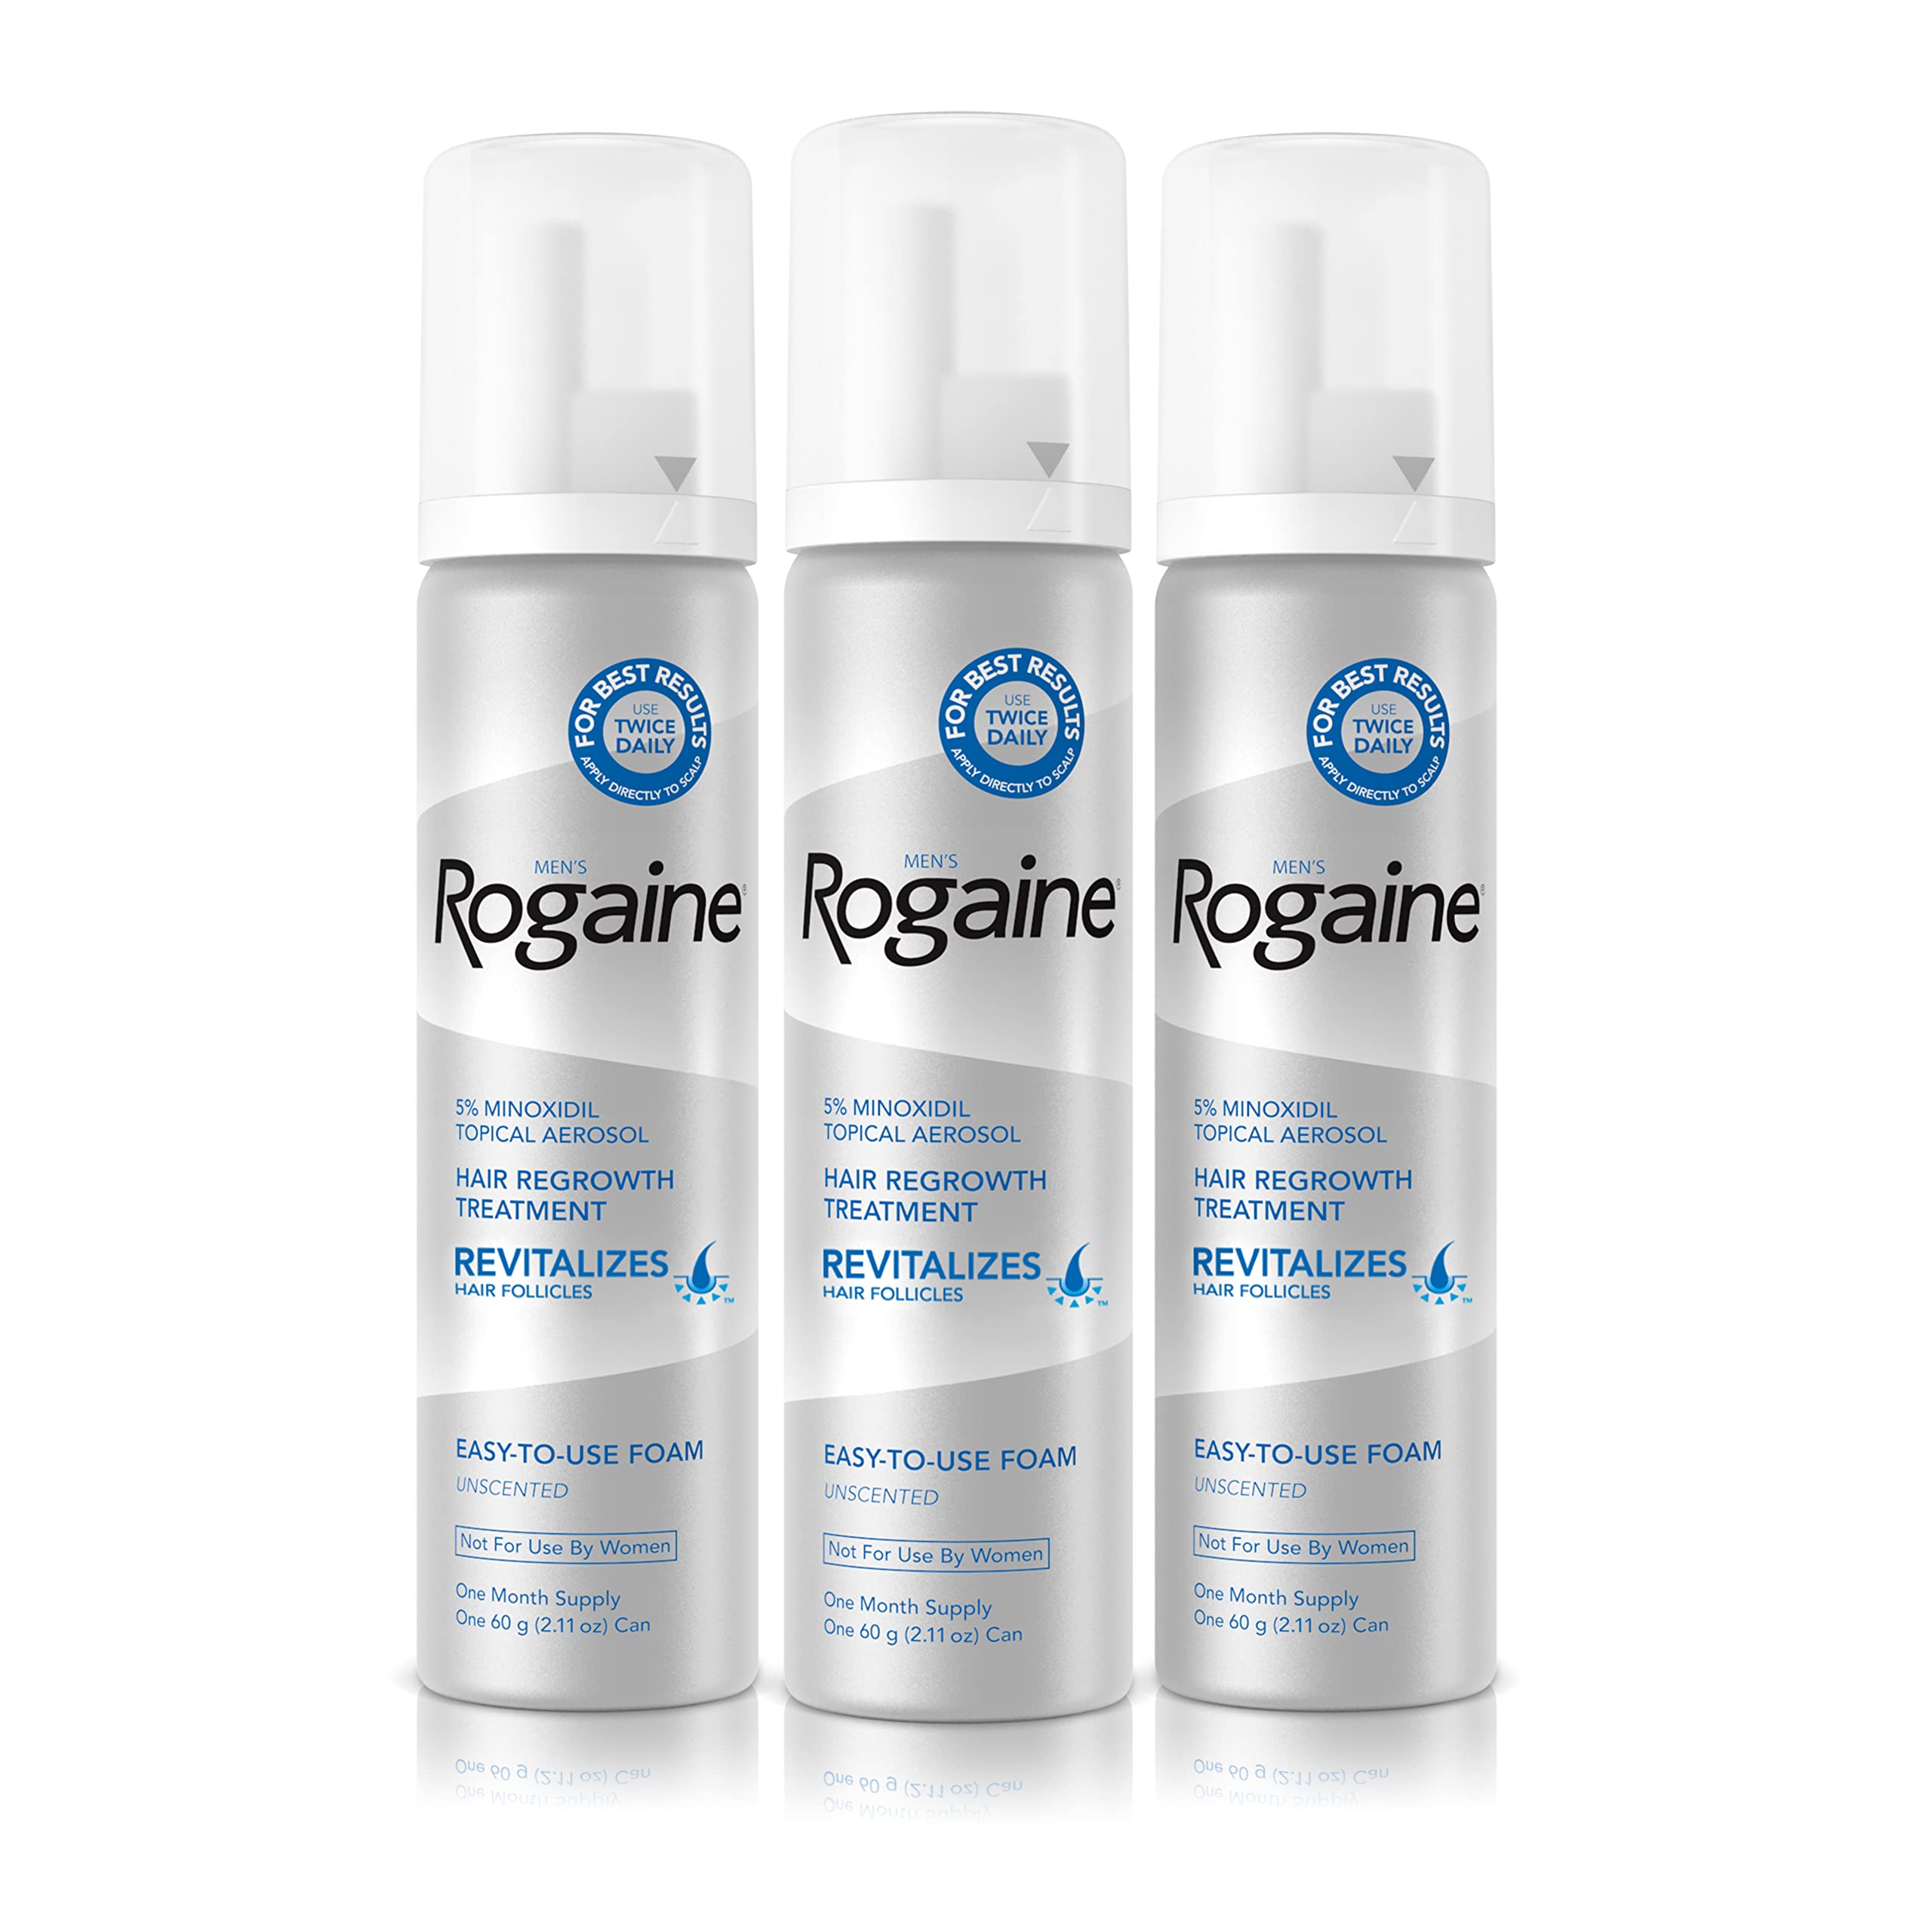 3-Pack of 2.11-Oz Men's Rogaine 5% Minoxidil Foam for Hair Loss & Hair Regrowth $39.40 & More + $10 Amazon Beauty Credit w/ S&S + Free Shipping